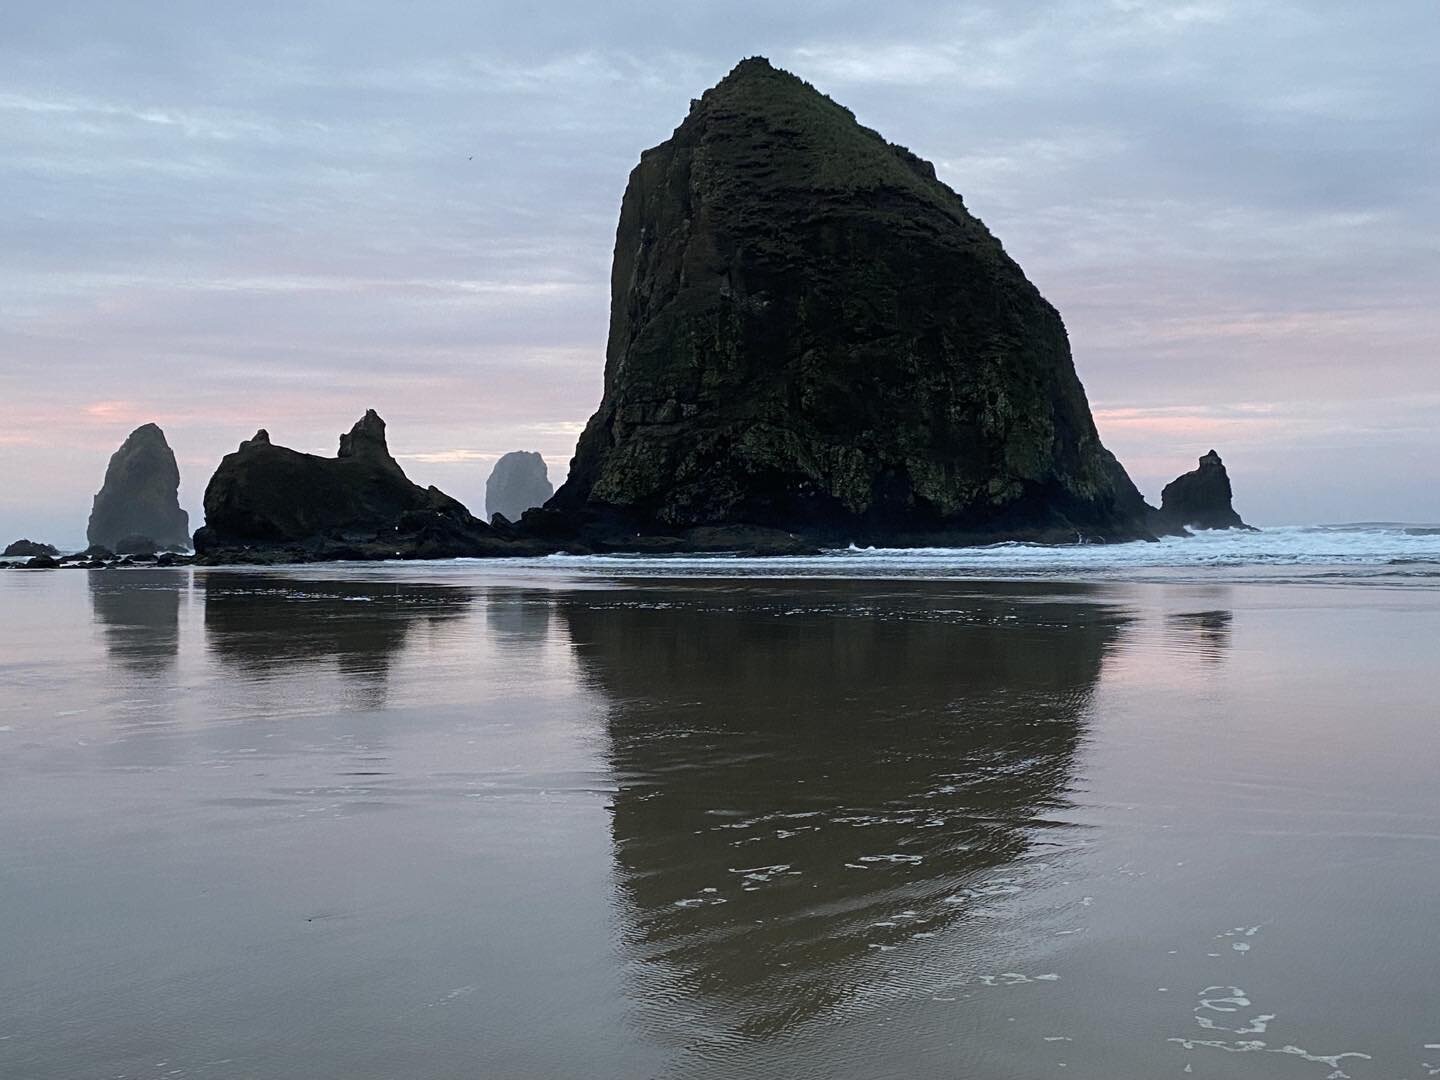 After project meetings, hearings, and work sessions are over, there is always the visit to the eternal Haystack Rock